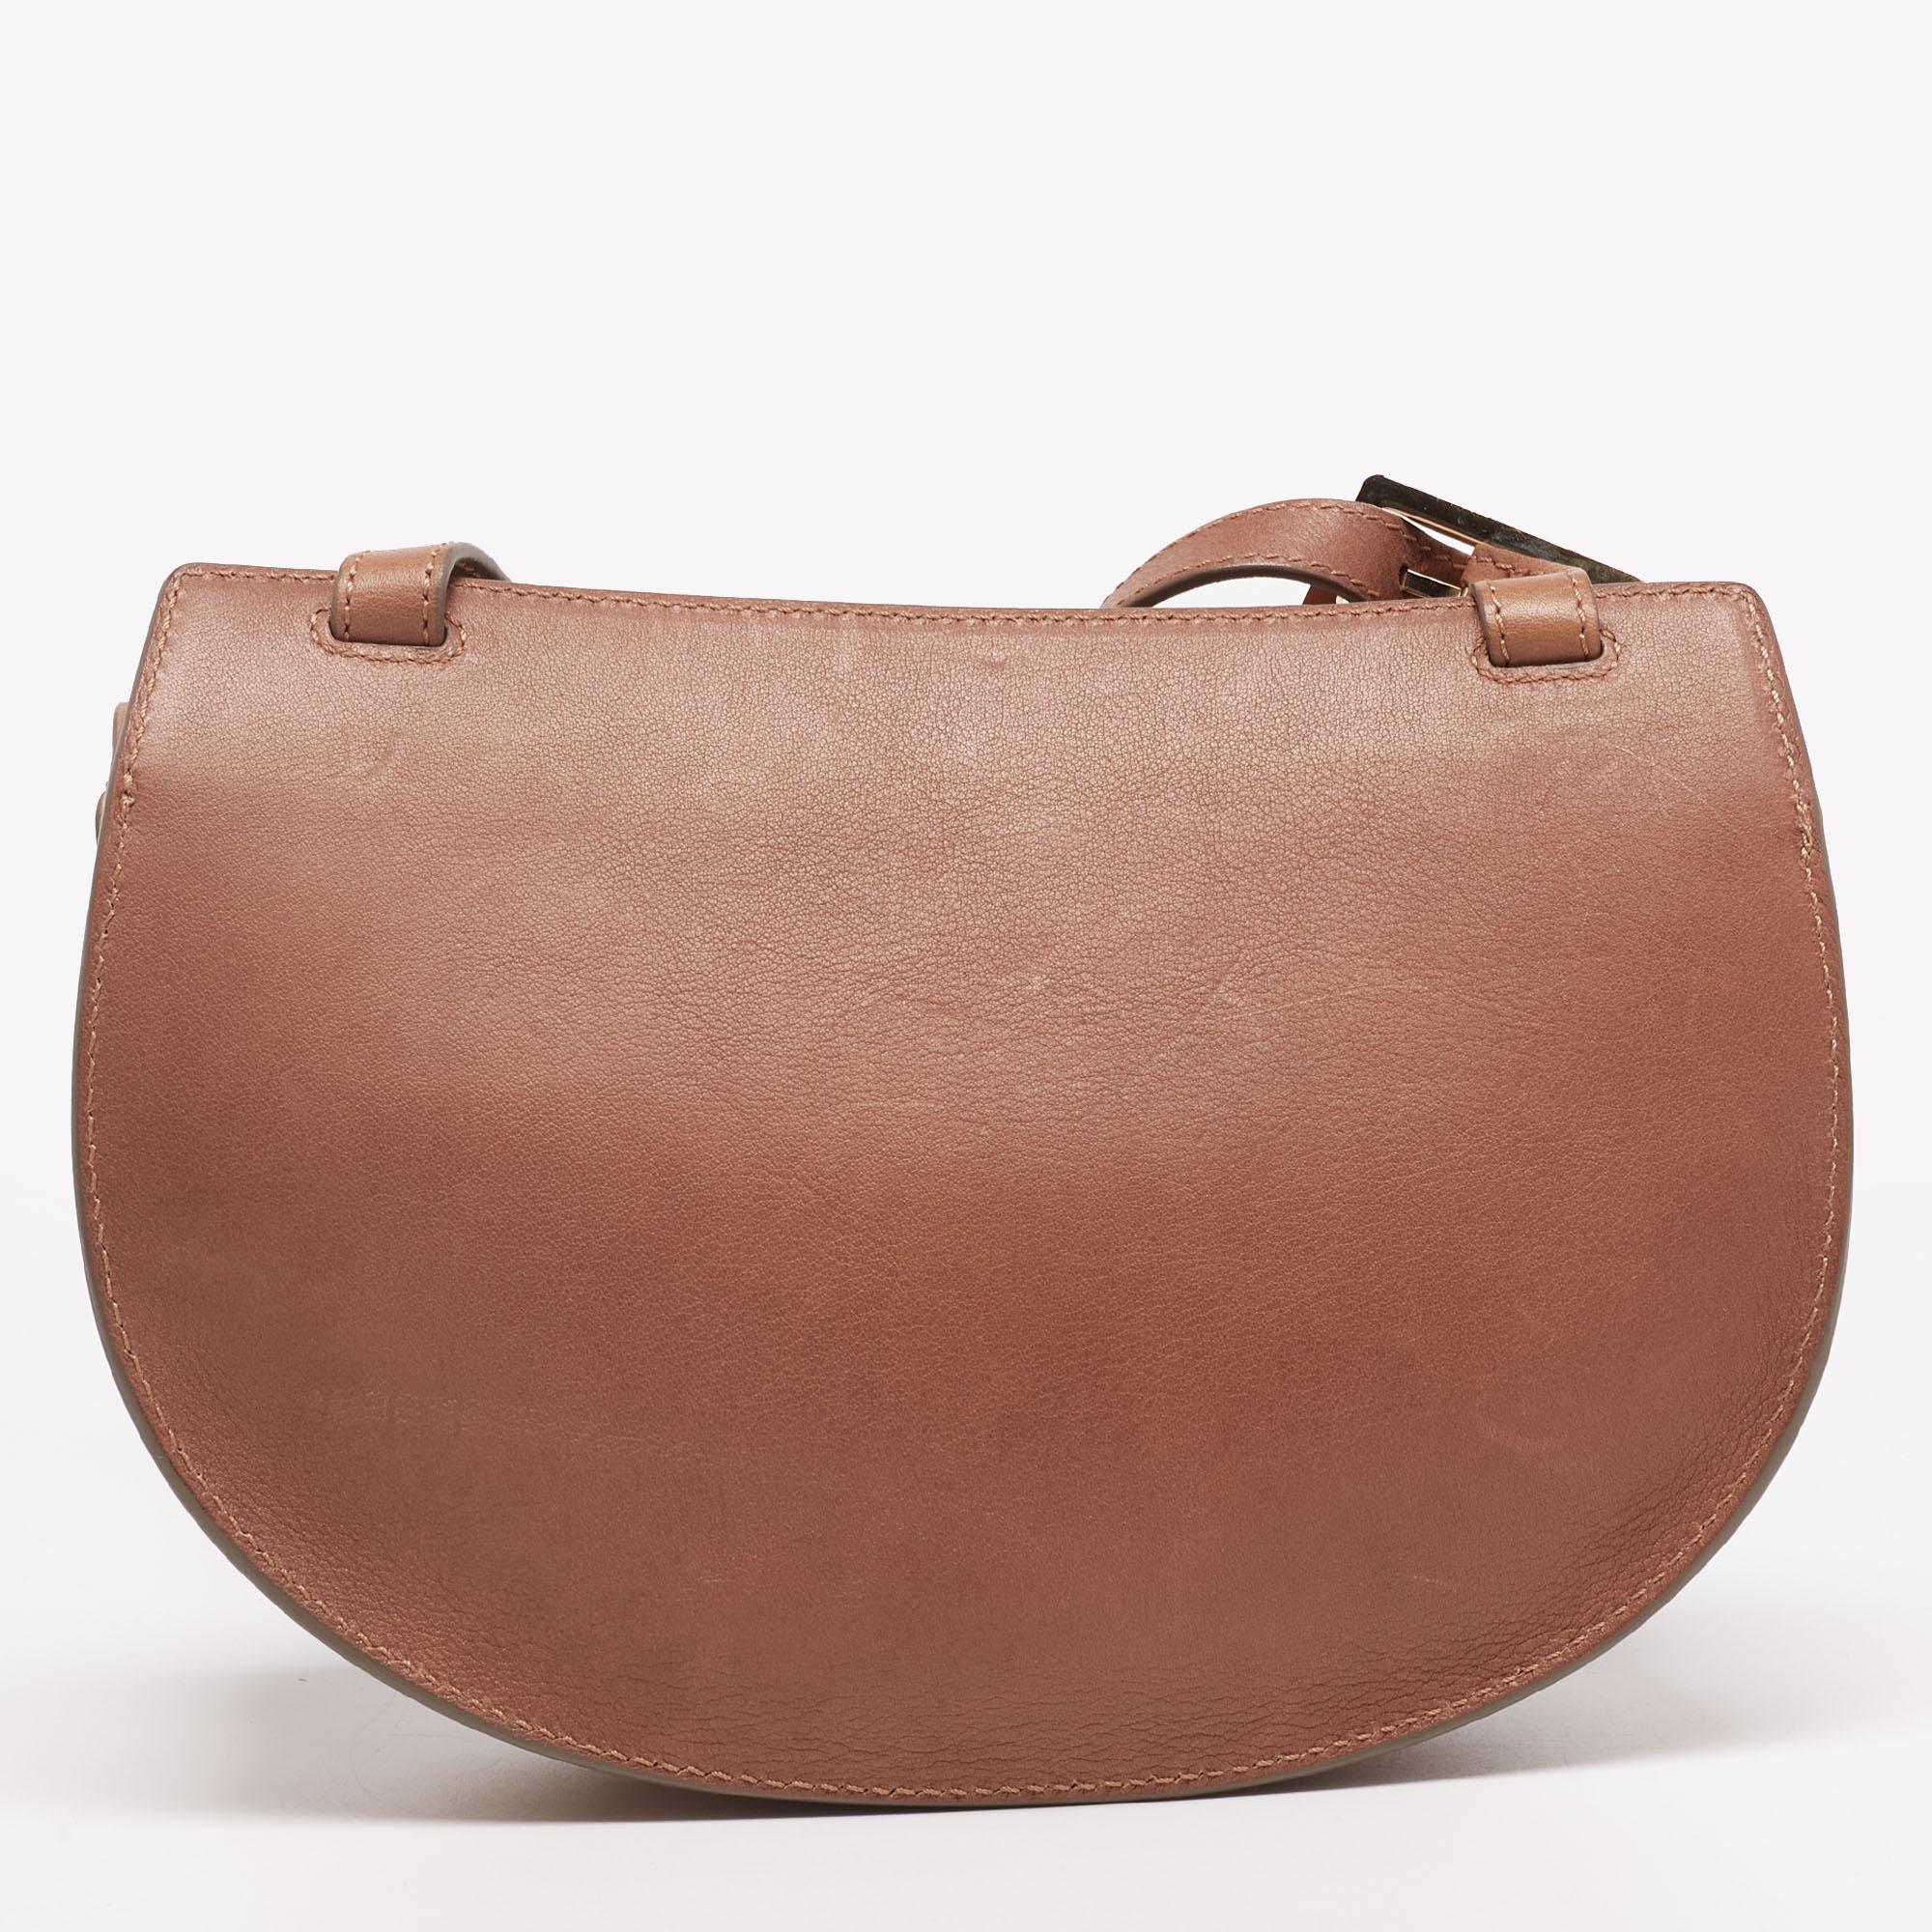 This stunning crossbody bag from Chloe is high in appeal and style. It is crafted from leather and is designed with a front flap that leads way to a spacious interior. The bag is held by a long shoulder strap. For those who love timeless pieces,